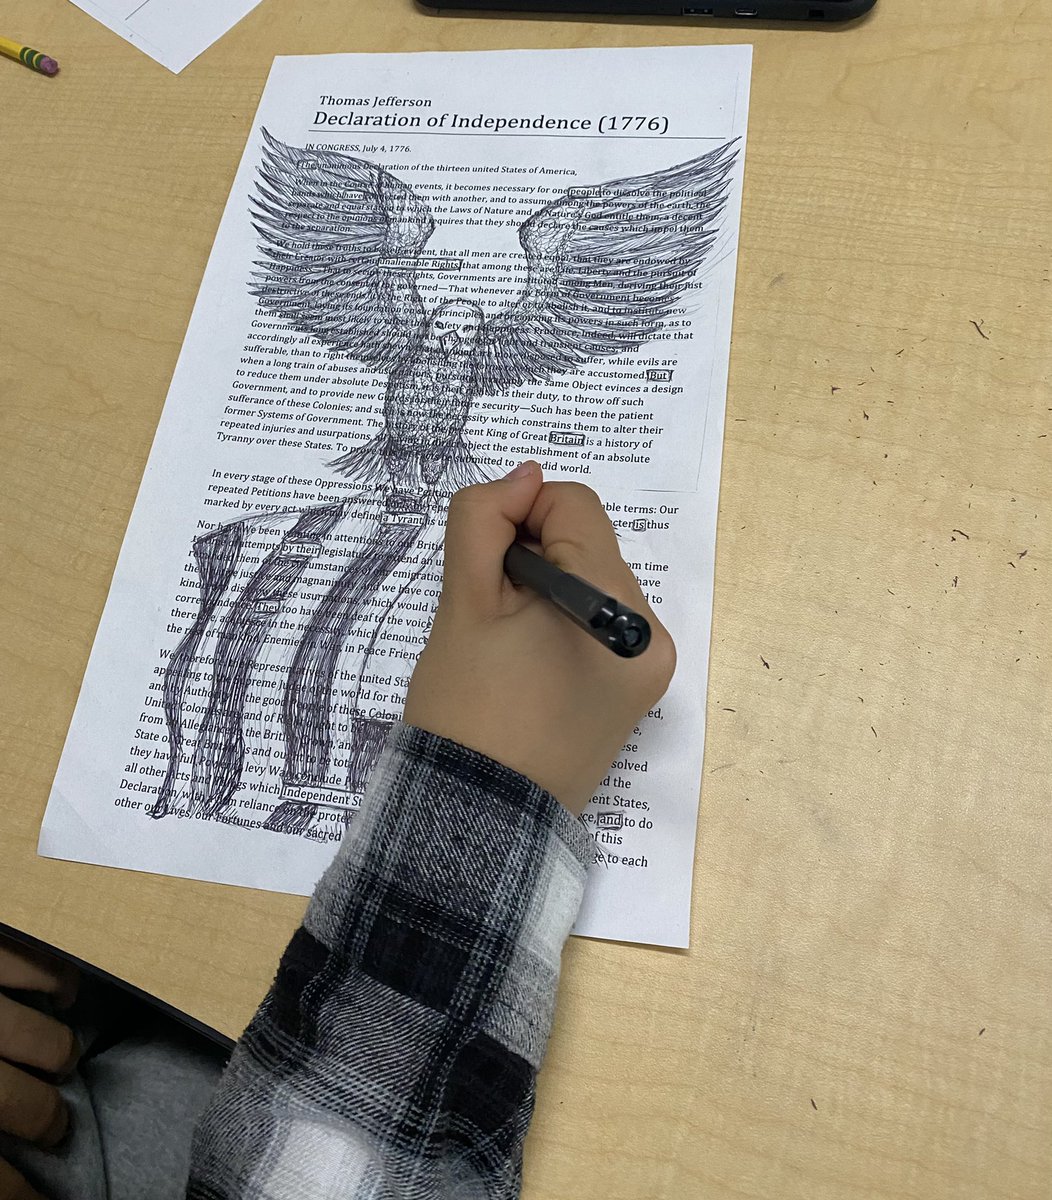 Ss poetry over the Declaration of Independence #soarERMSeagles https://t.co/NZG12cthBy